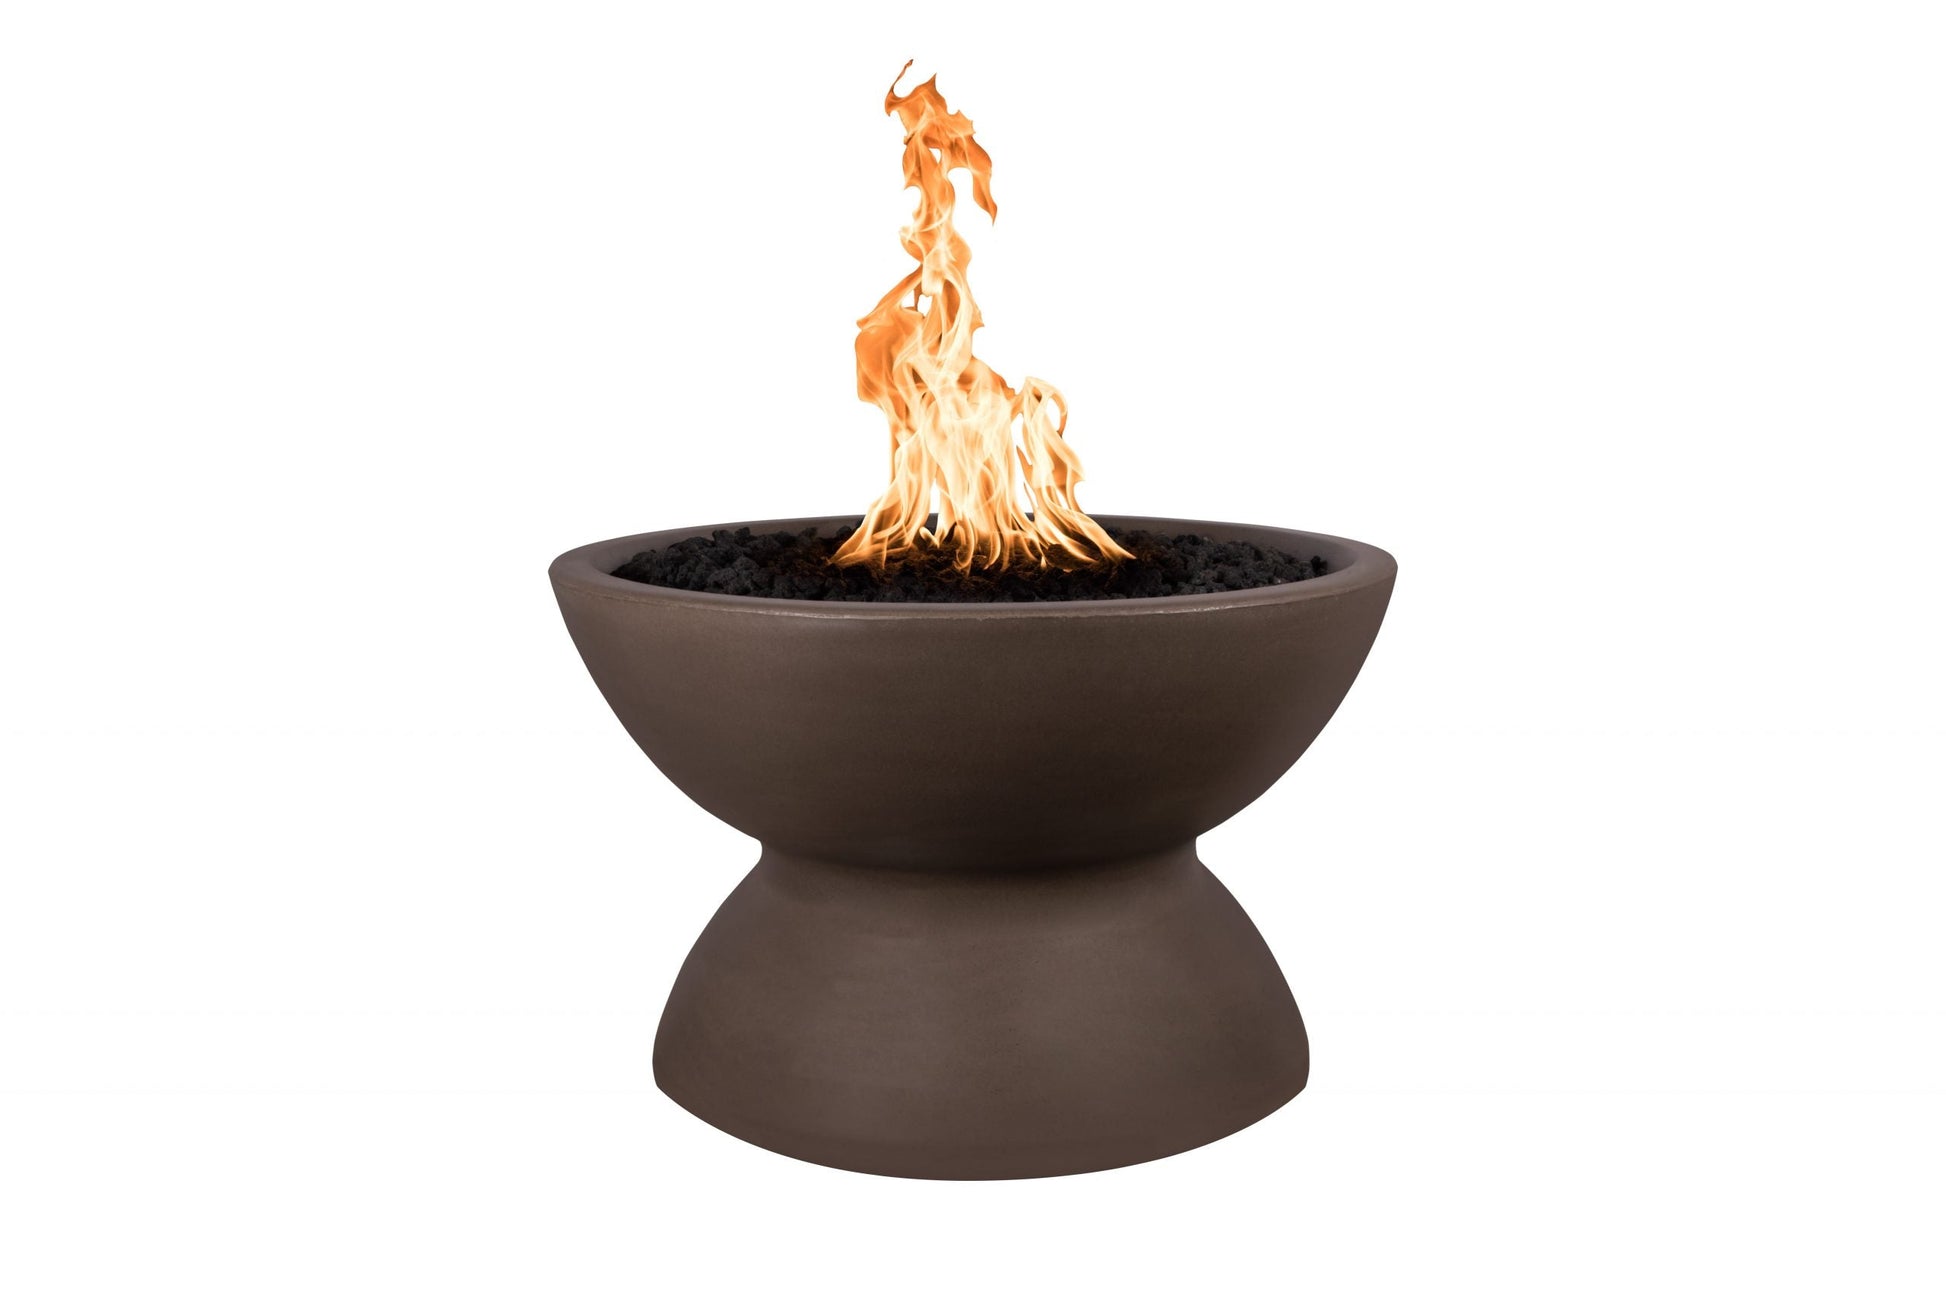 The Outdoor Plus Round Copa 33" Rustic Moss Stone GFRC Concrete Liquid Propane Fire Pit with 12V Electronic Ignition